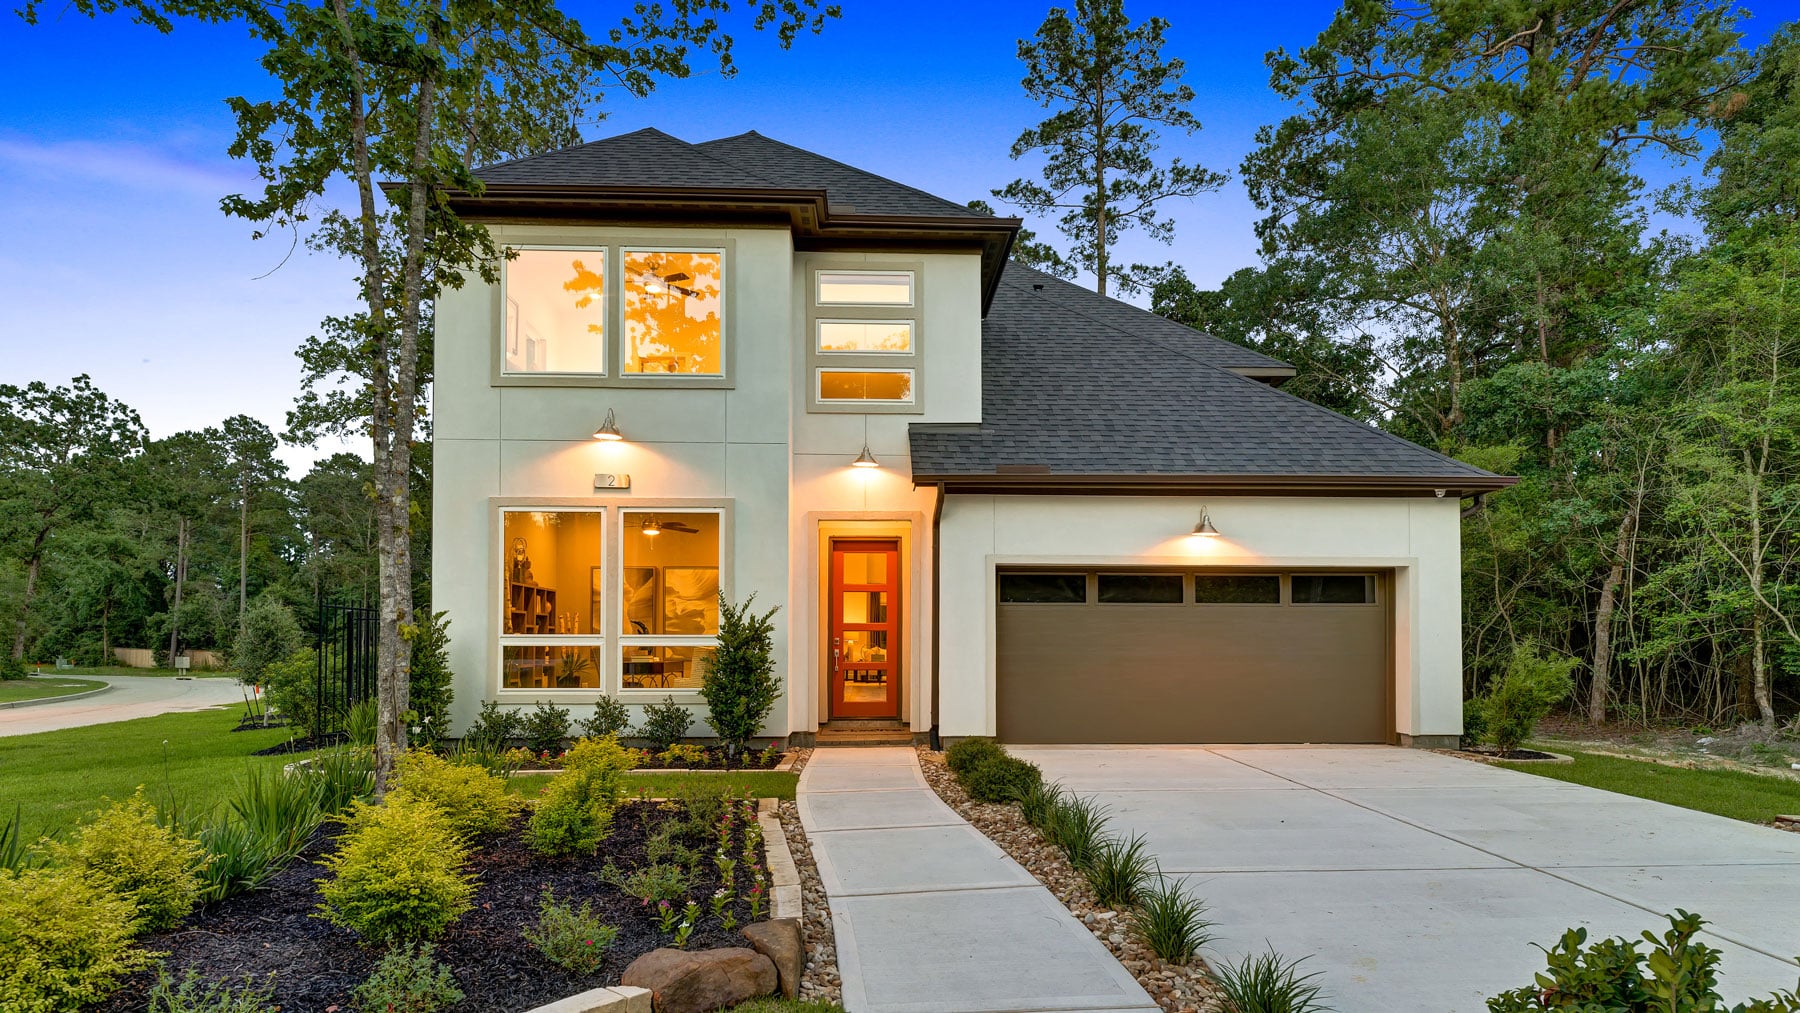 model homes to visit near me